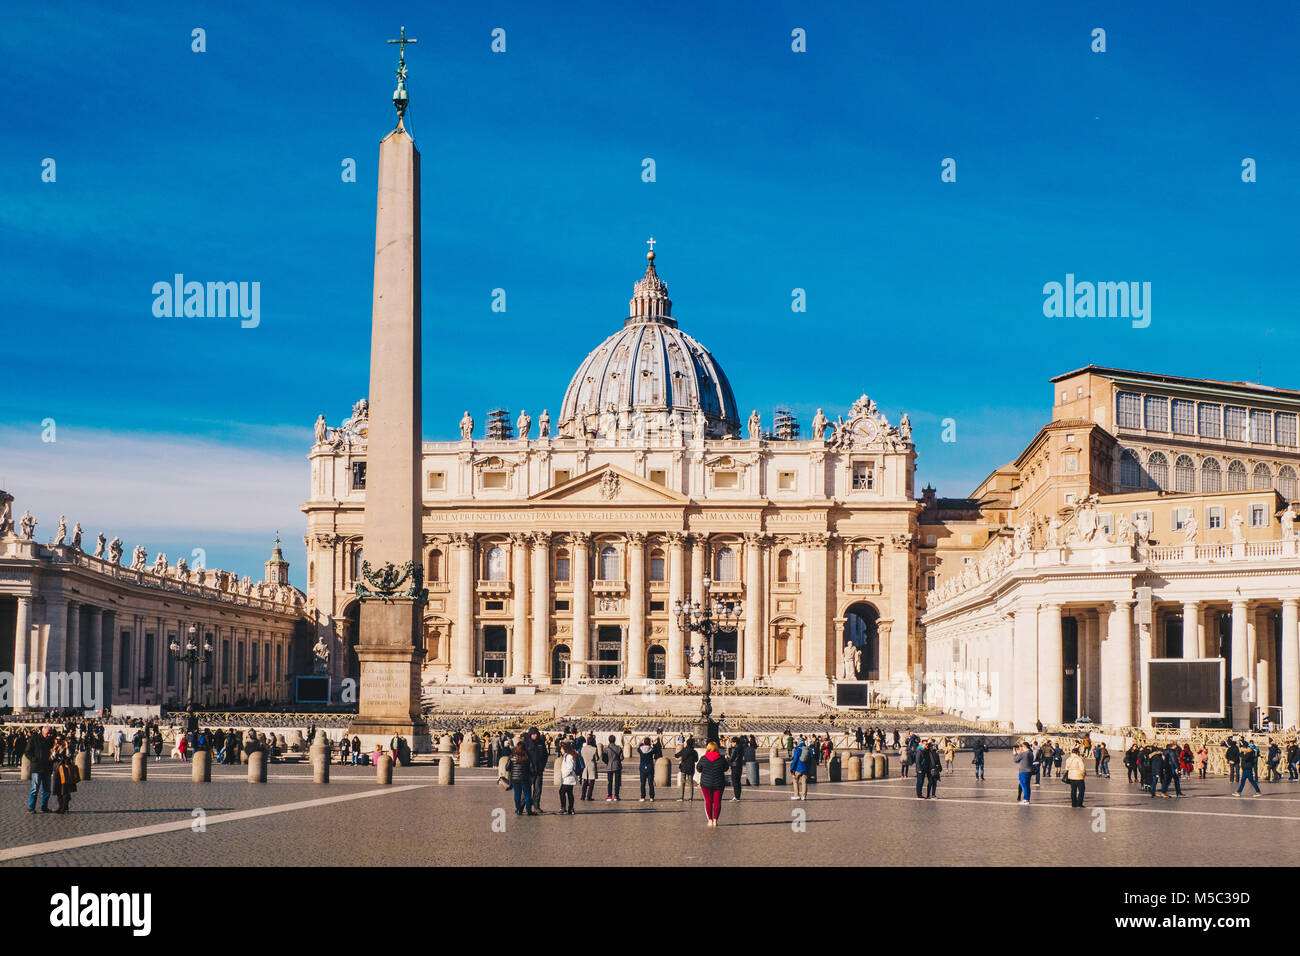 St. Peter's square and Saint Peter's Basilica in the Vatican City in Rome, Italy Stock Photo